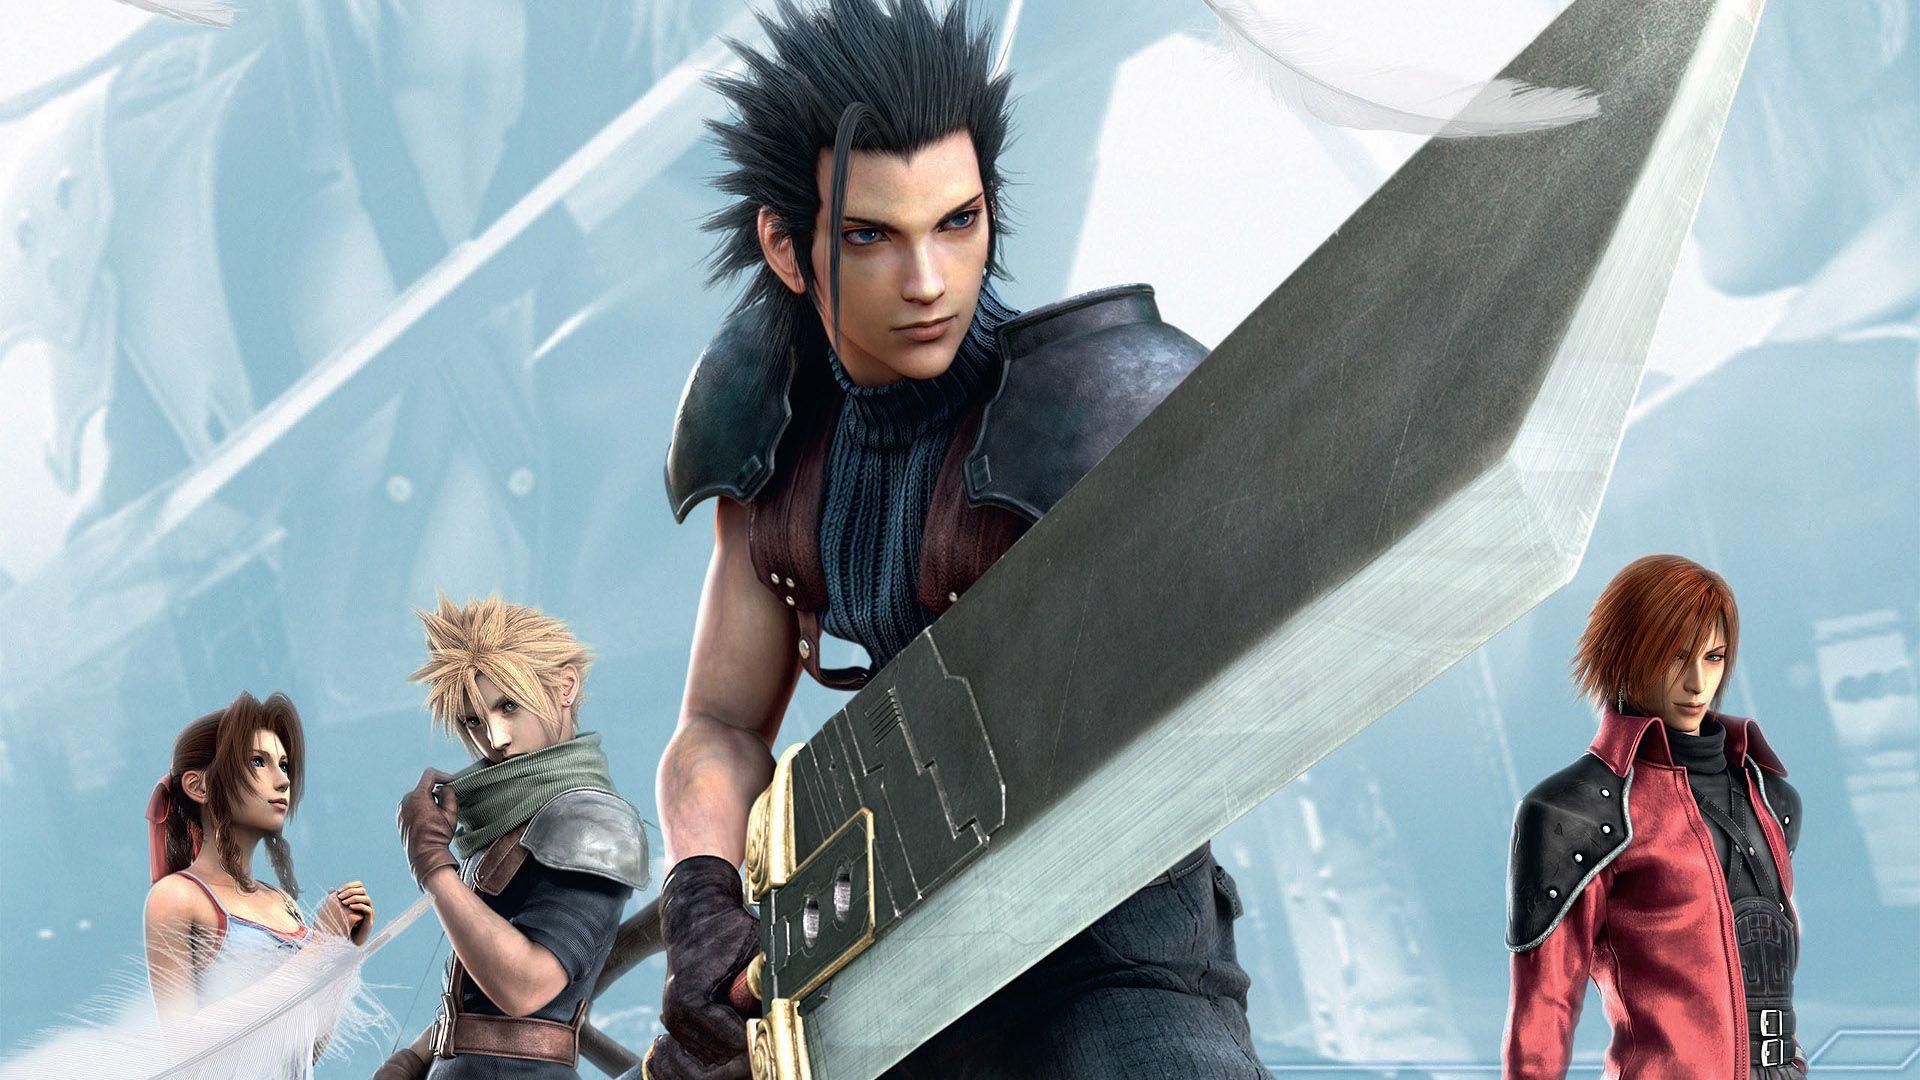 cloud strife and zack fair. /resolutions